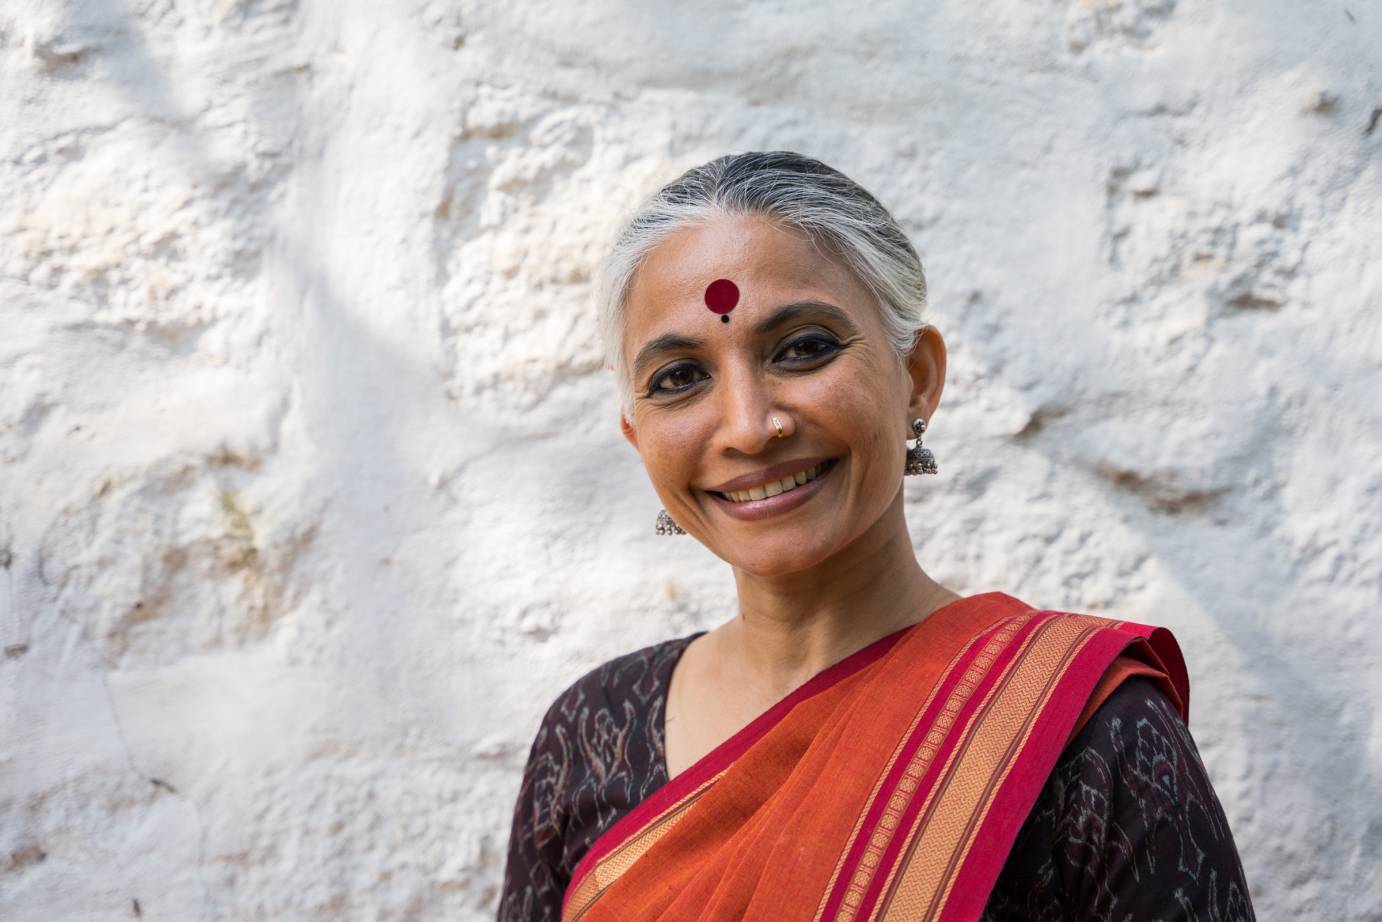 A grey-haired smiling woman, with a deep red bindi (dot) in the middle of her forehead, dangling earrings and nose ring, wears a long red and yellow striped fabric over her left shoulder beneath which she wears a dark and white patterned top.